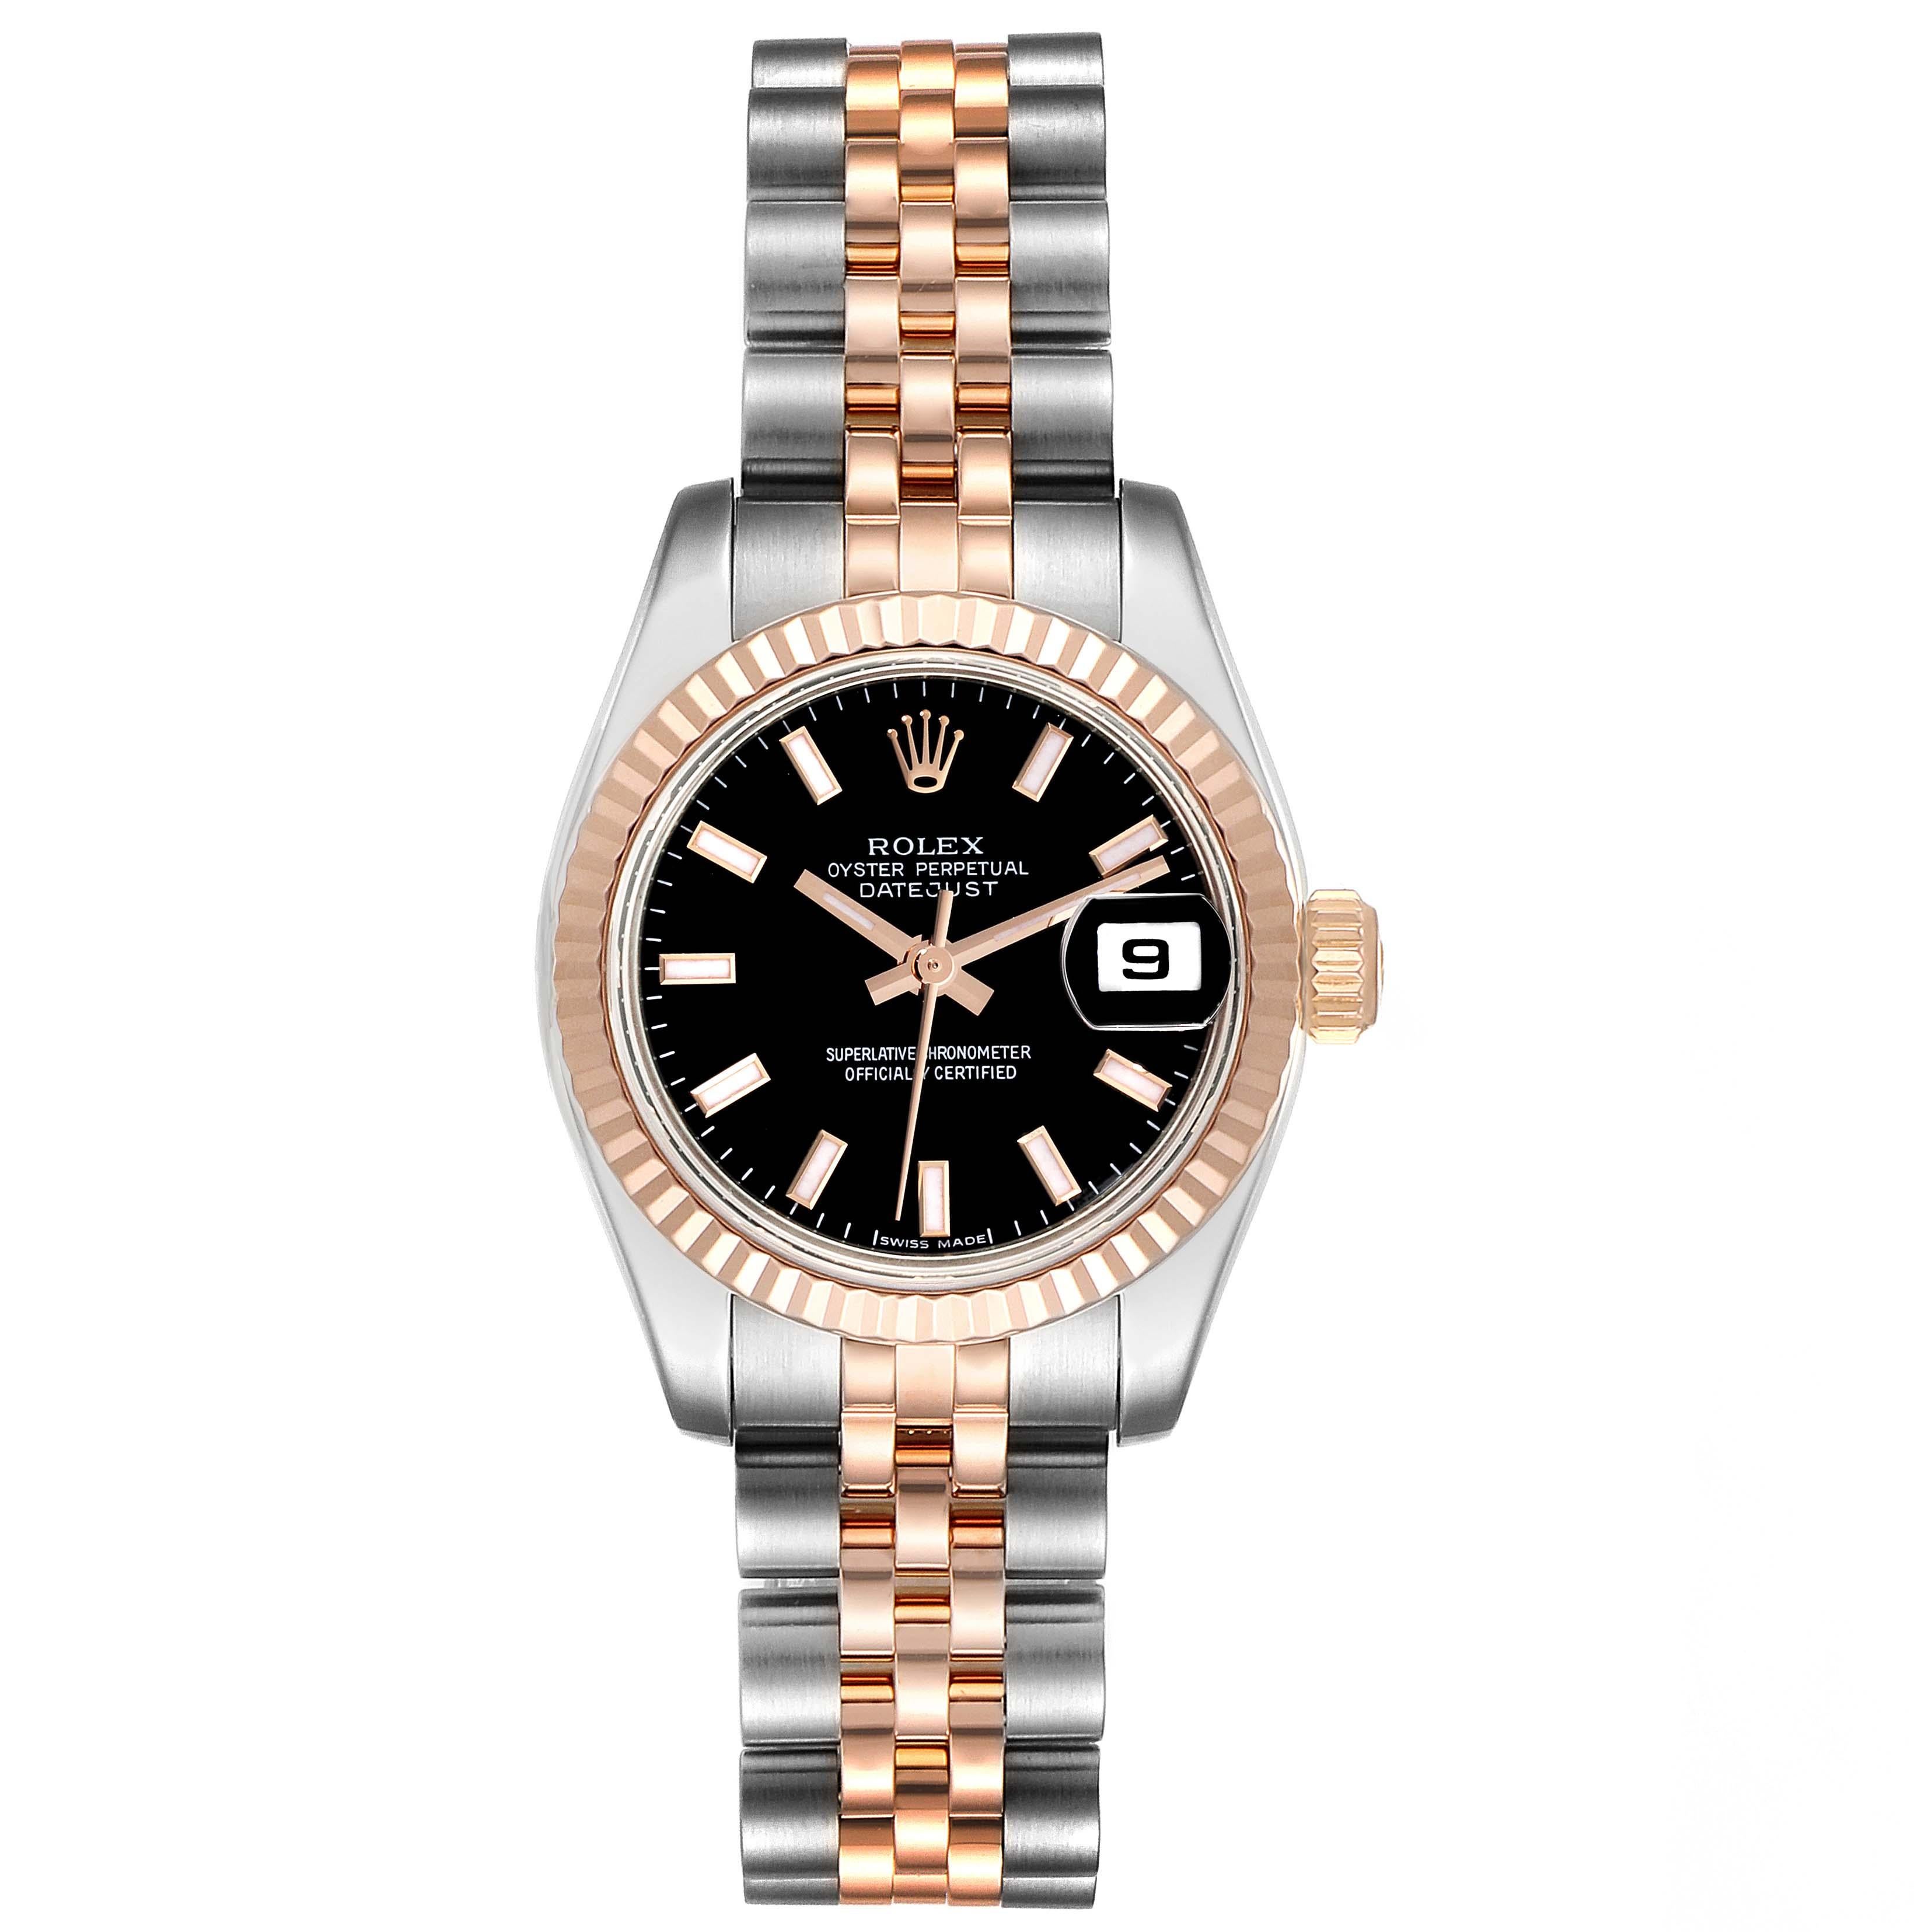 Rolex Datejust Steel Rose Gold Black Dial Ladies Watch 179171 Box Card. Officially certified chronometer automatic self-winding movement. Stainless steel oyster case 26.0 mm in diameter. Rolex logo on 18k everose gold crown. 18k rose gold fluted